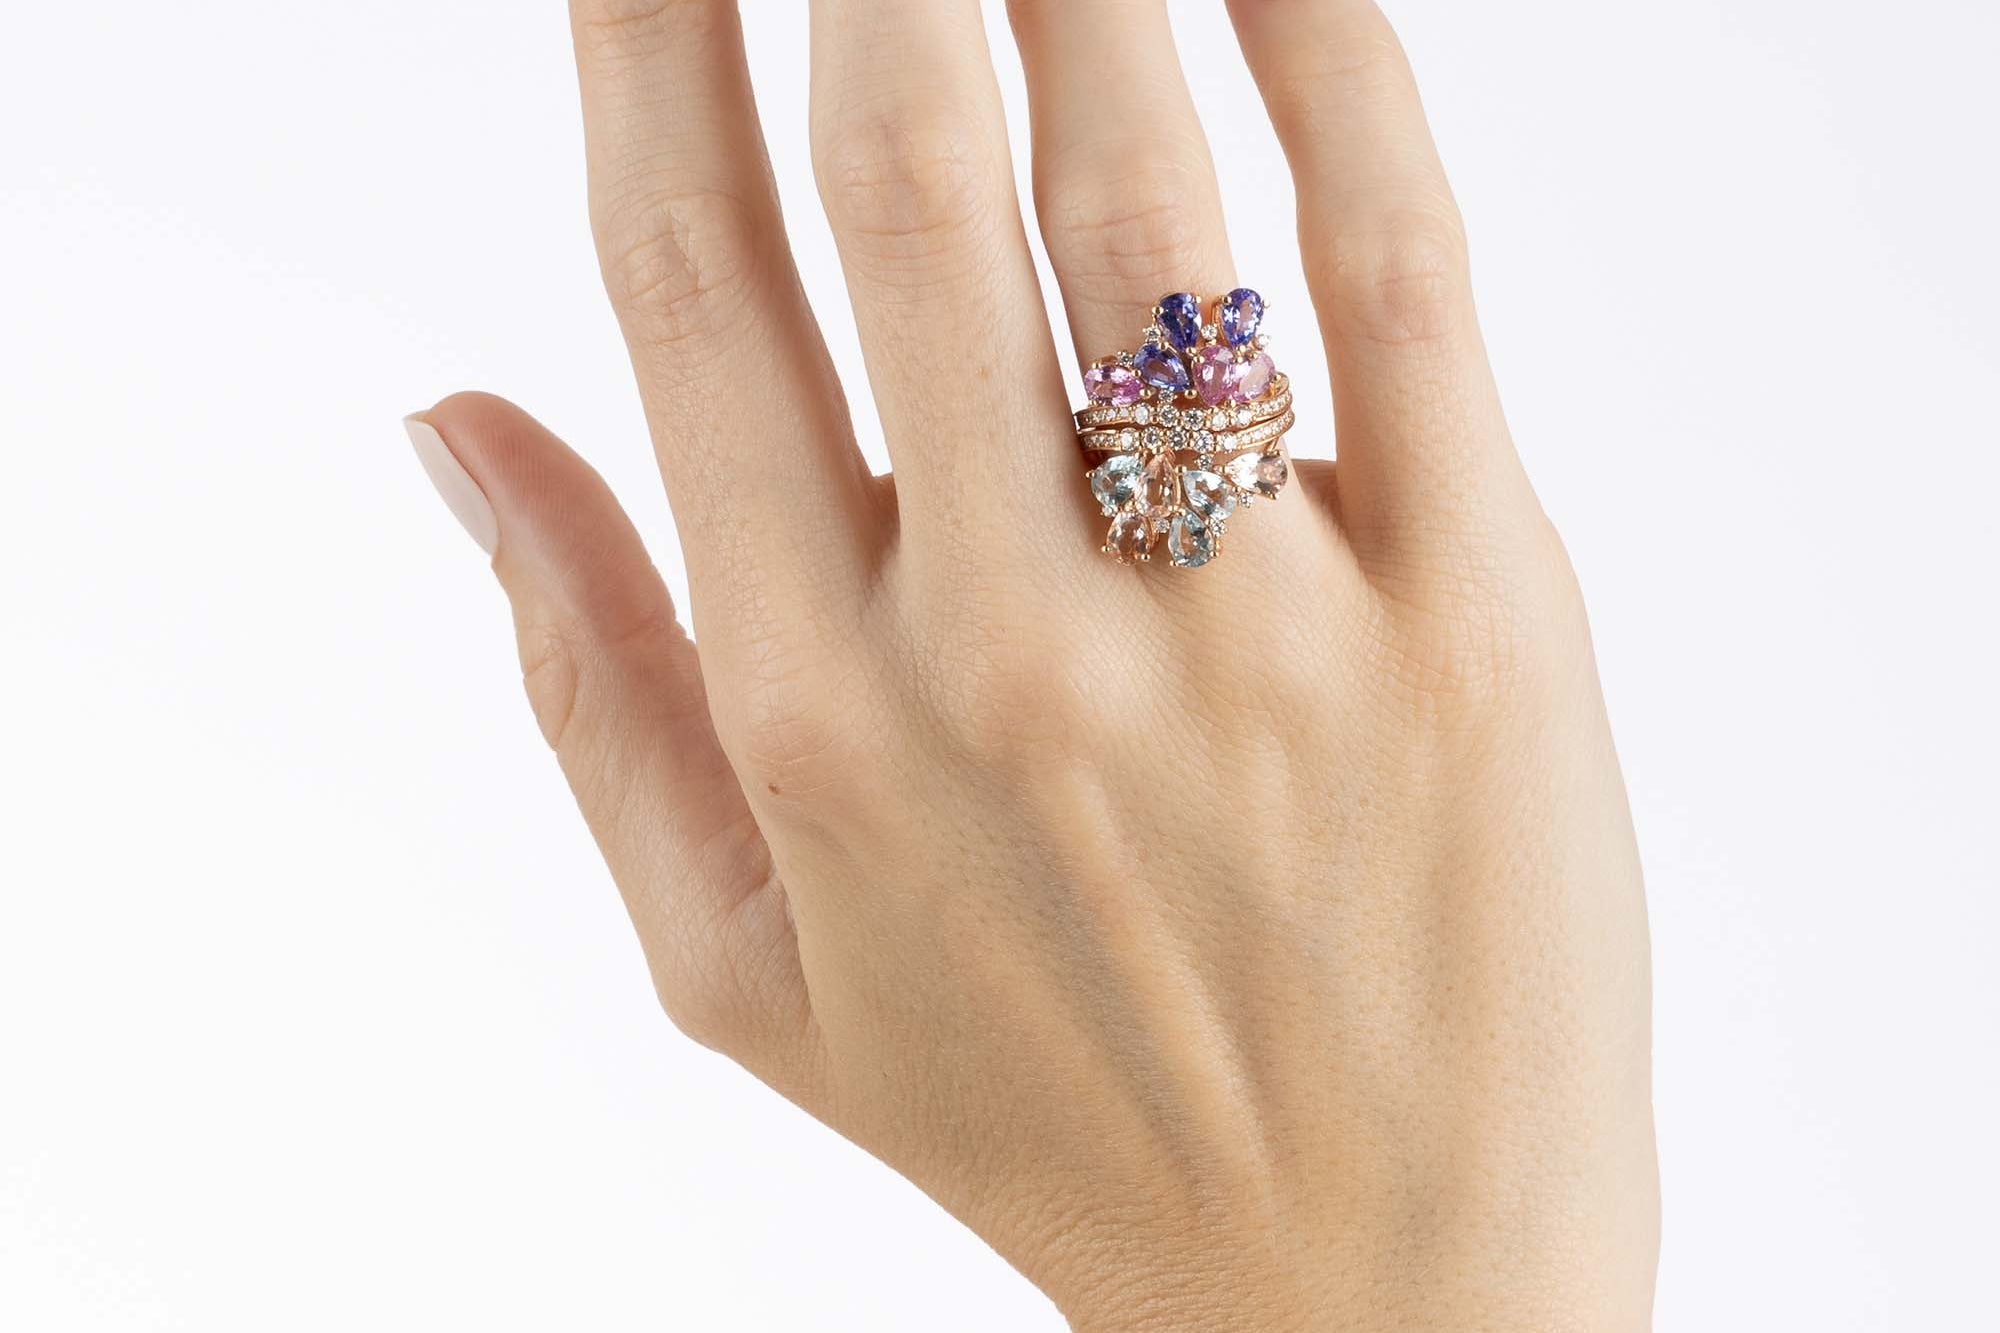 Rose Gold and Diamond dual Ring - Blue and Pink Sapphire, Morganite and Topaz, Large - Model shot